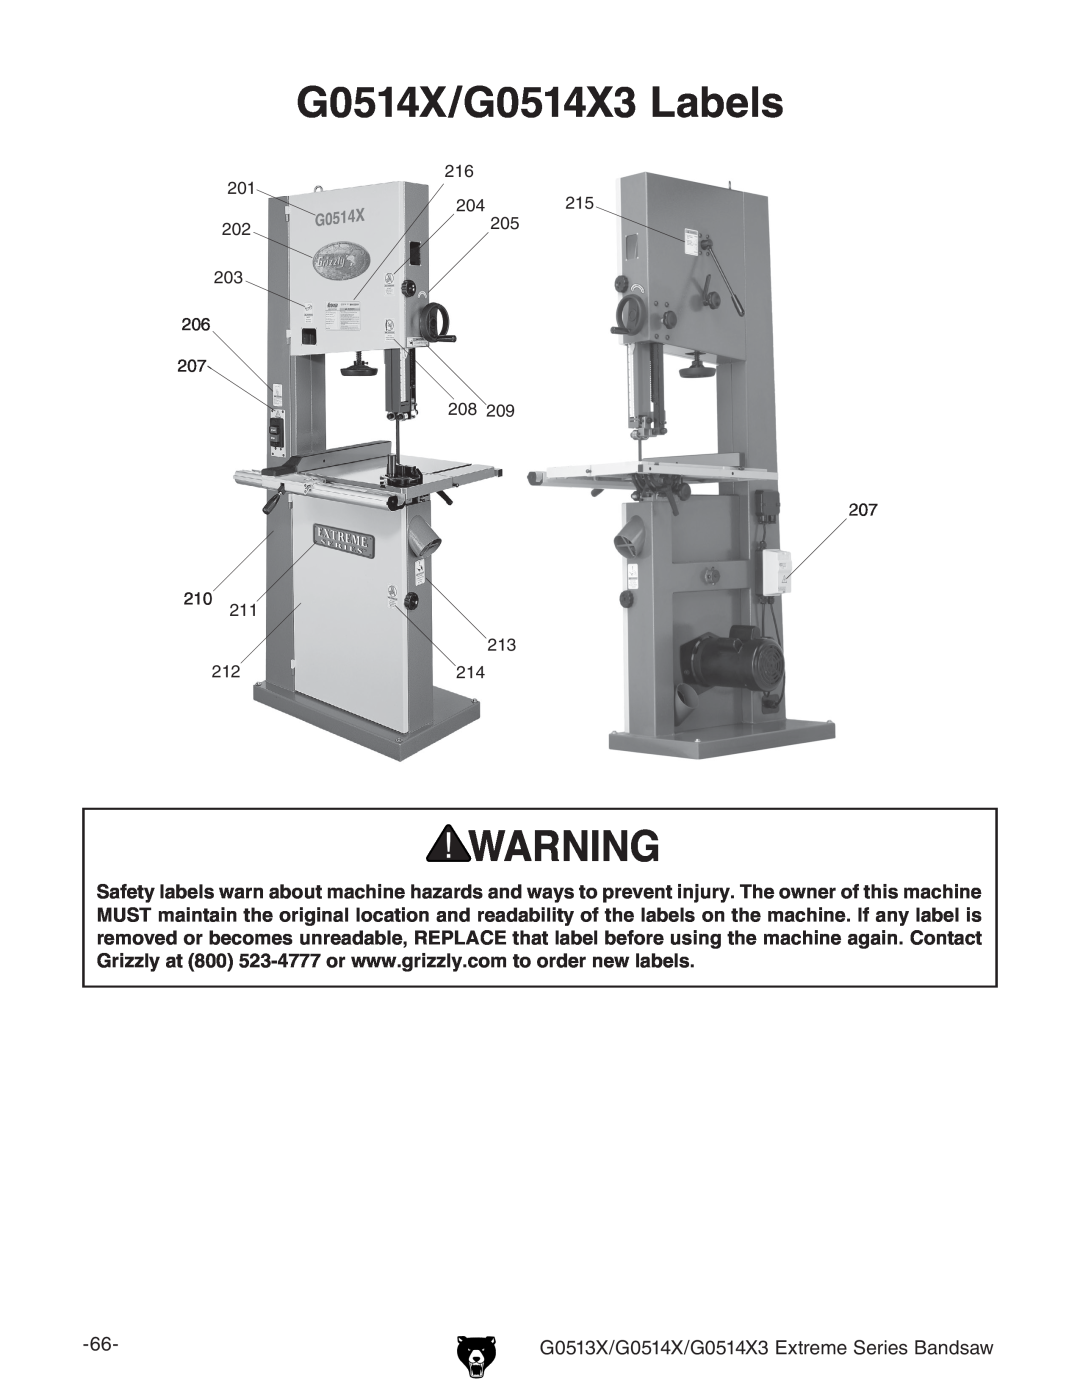 Grizzly owner manual G0514X/G0514X3 Labels, G0513X/G0514X/G0514X3 Extreme Series Bandsaw 